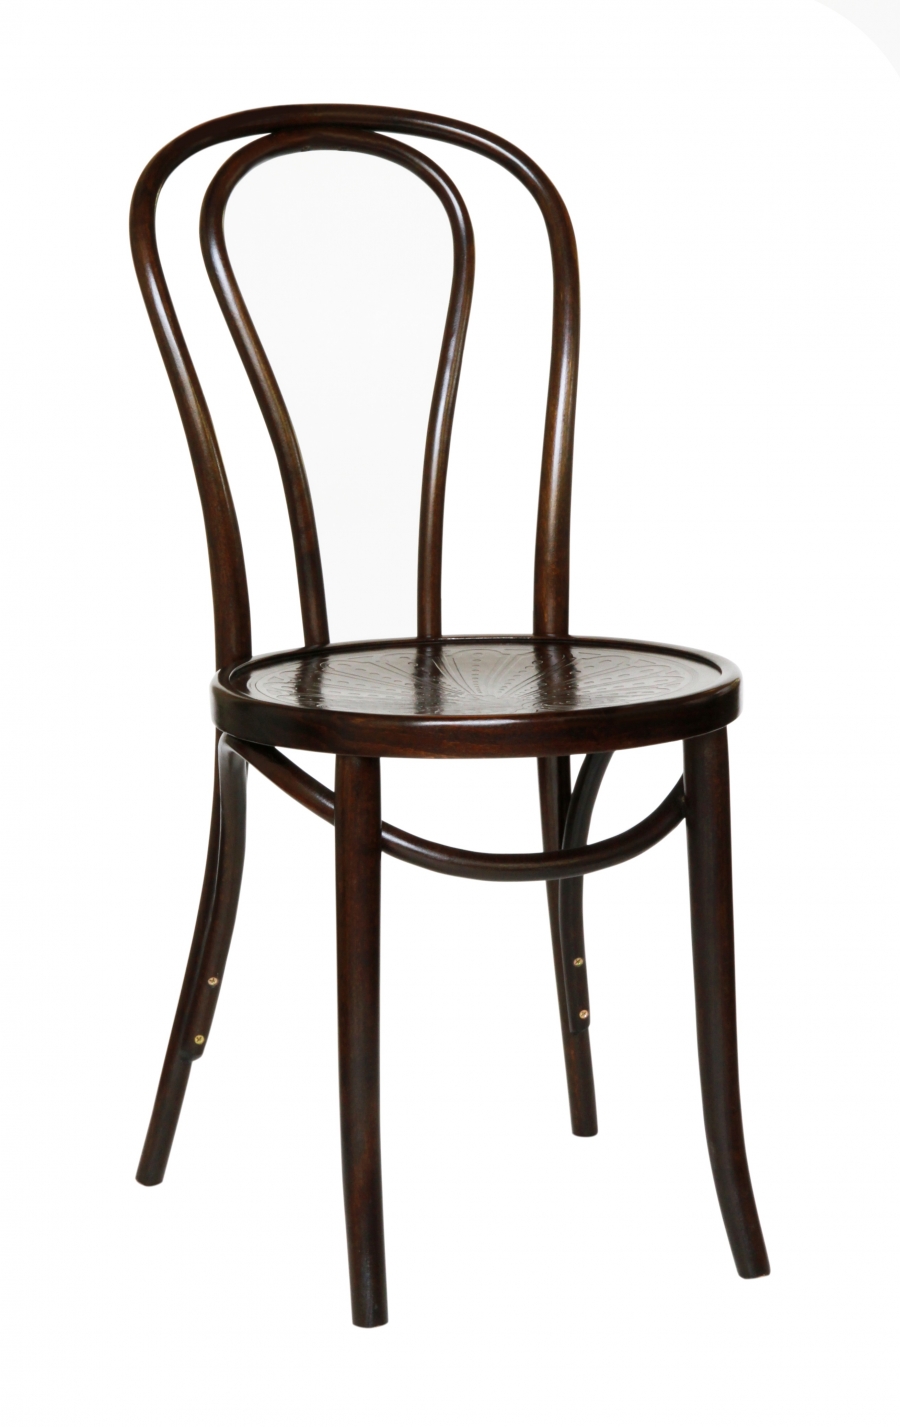 No. 18 Thonet dining chair designed by Michael Thonet, Thonet classic dining chair 